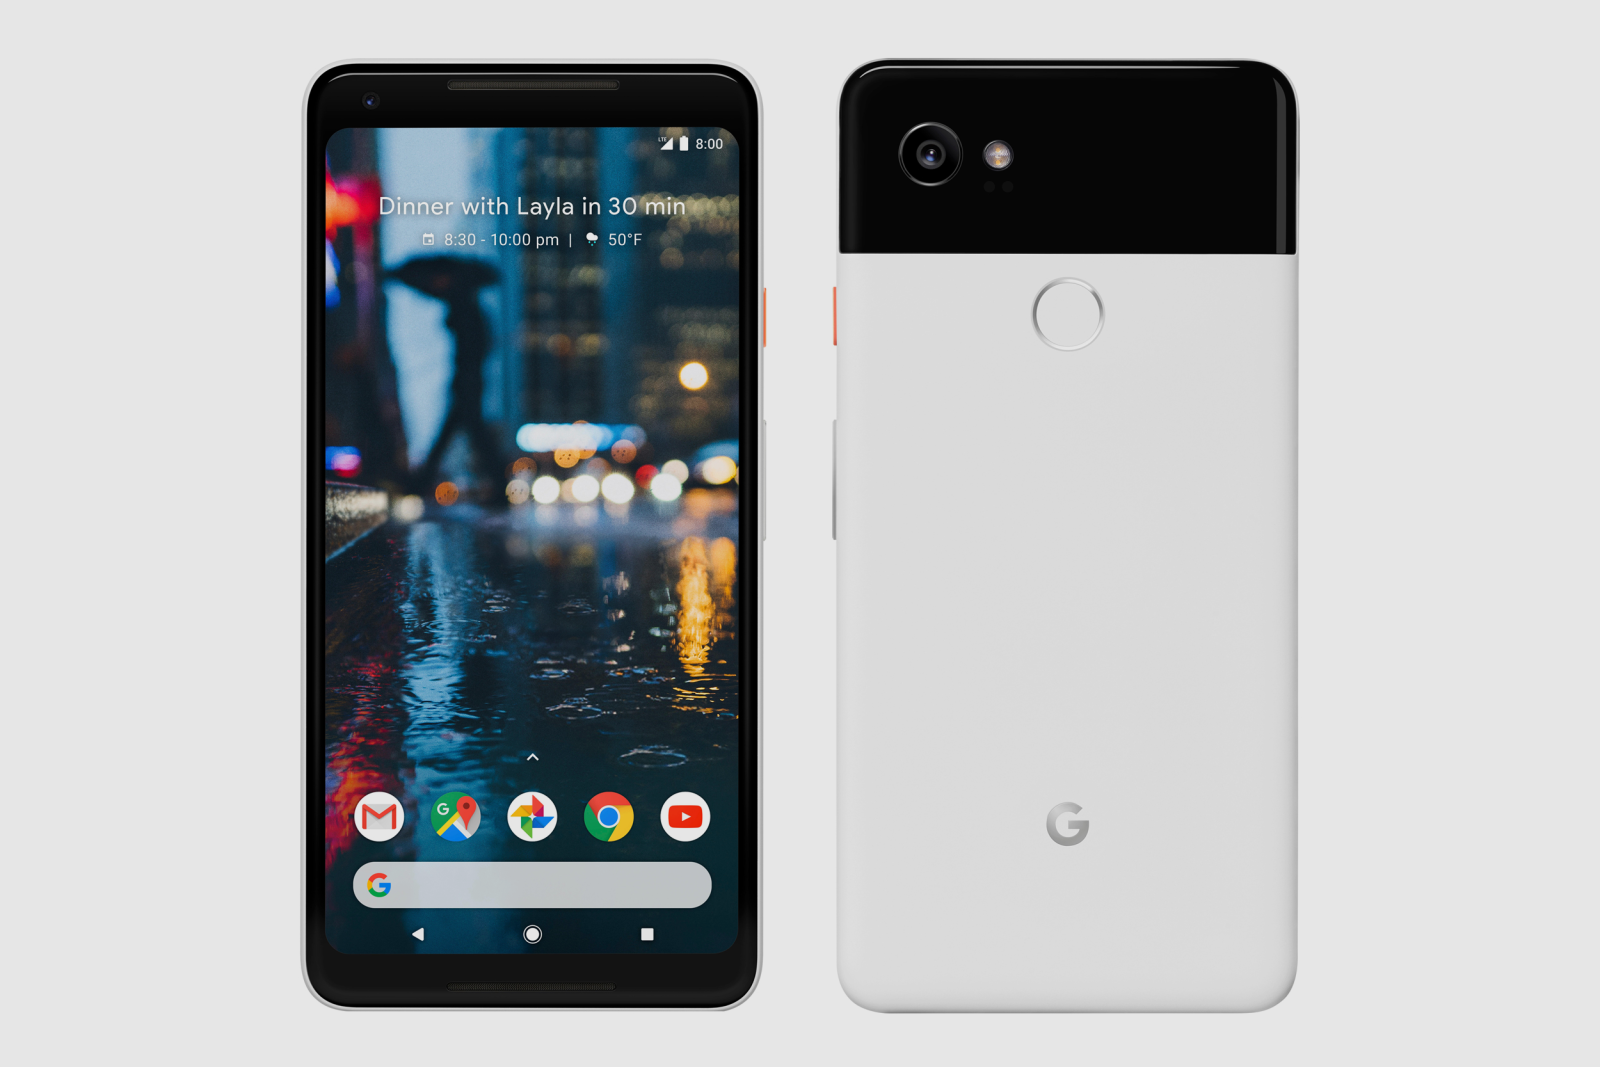 Google Pixel 2 Xl Pictured With Case And Without A Case In New Leak image 3